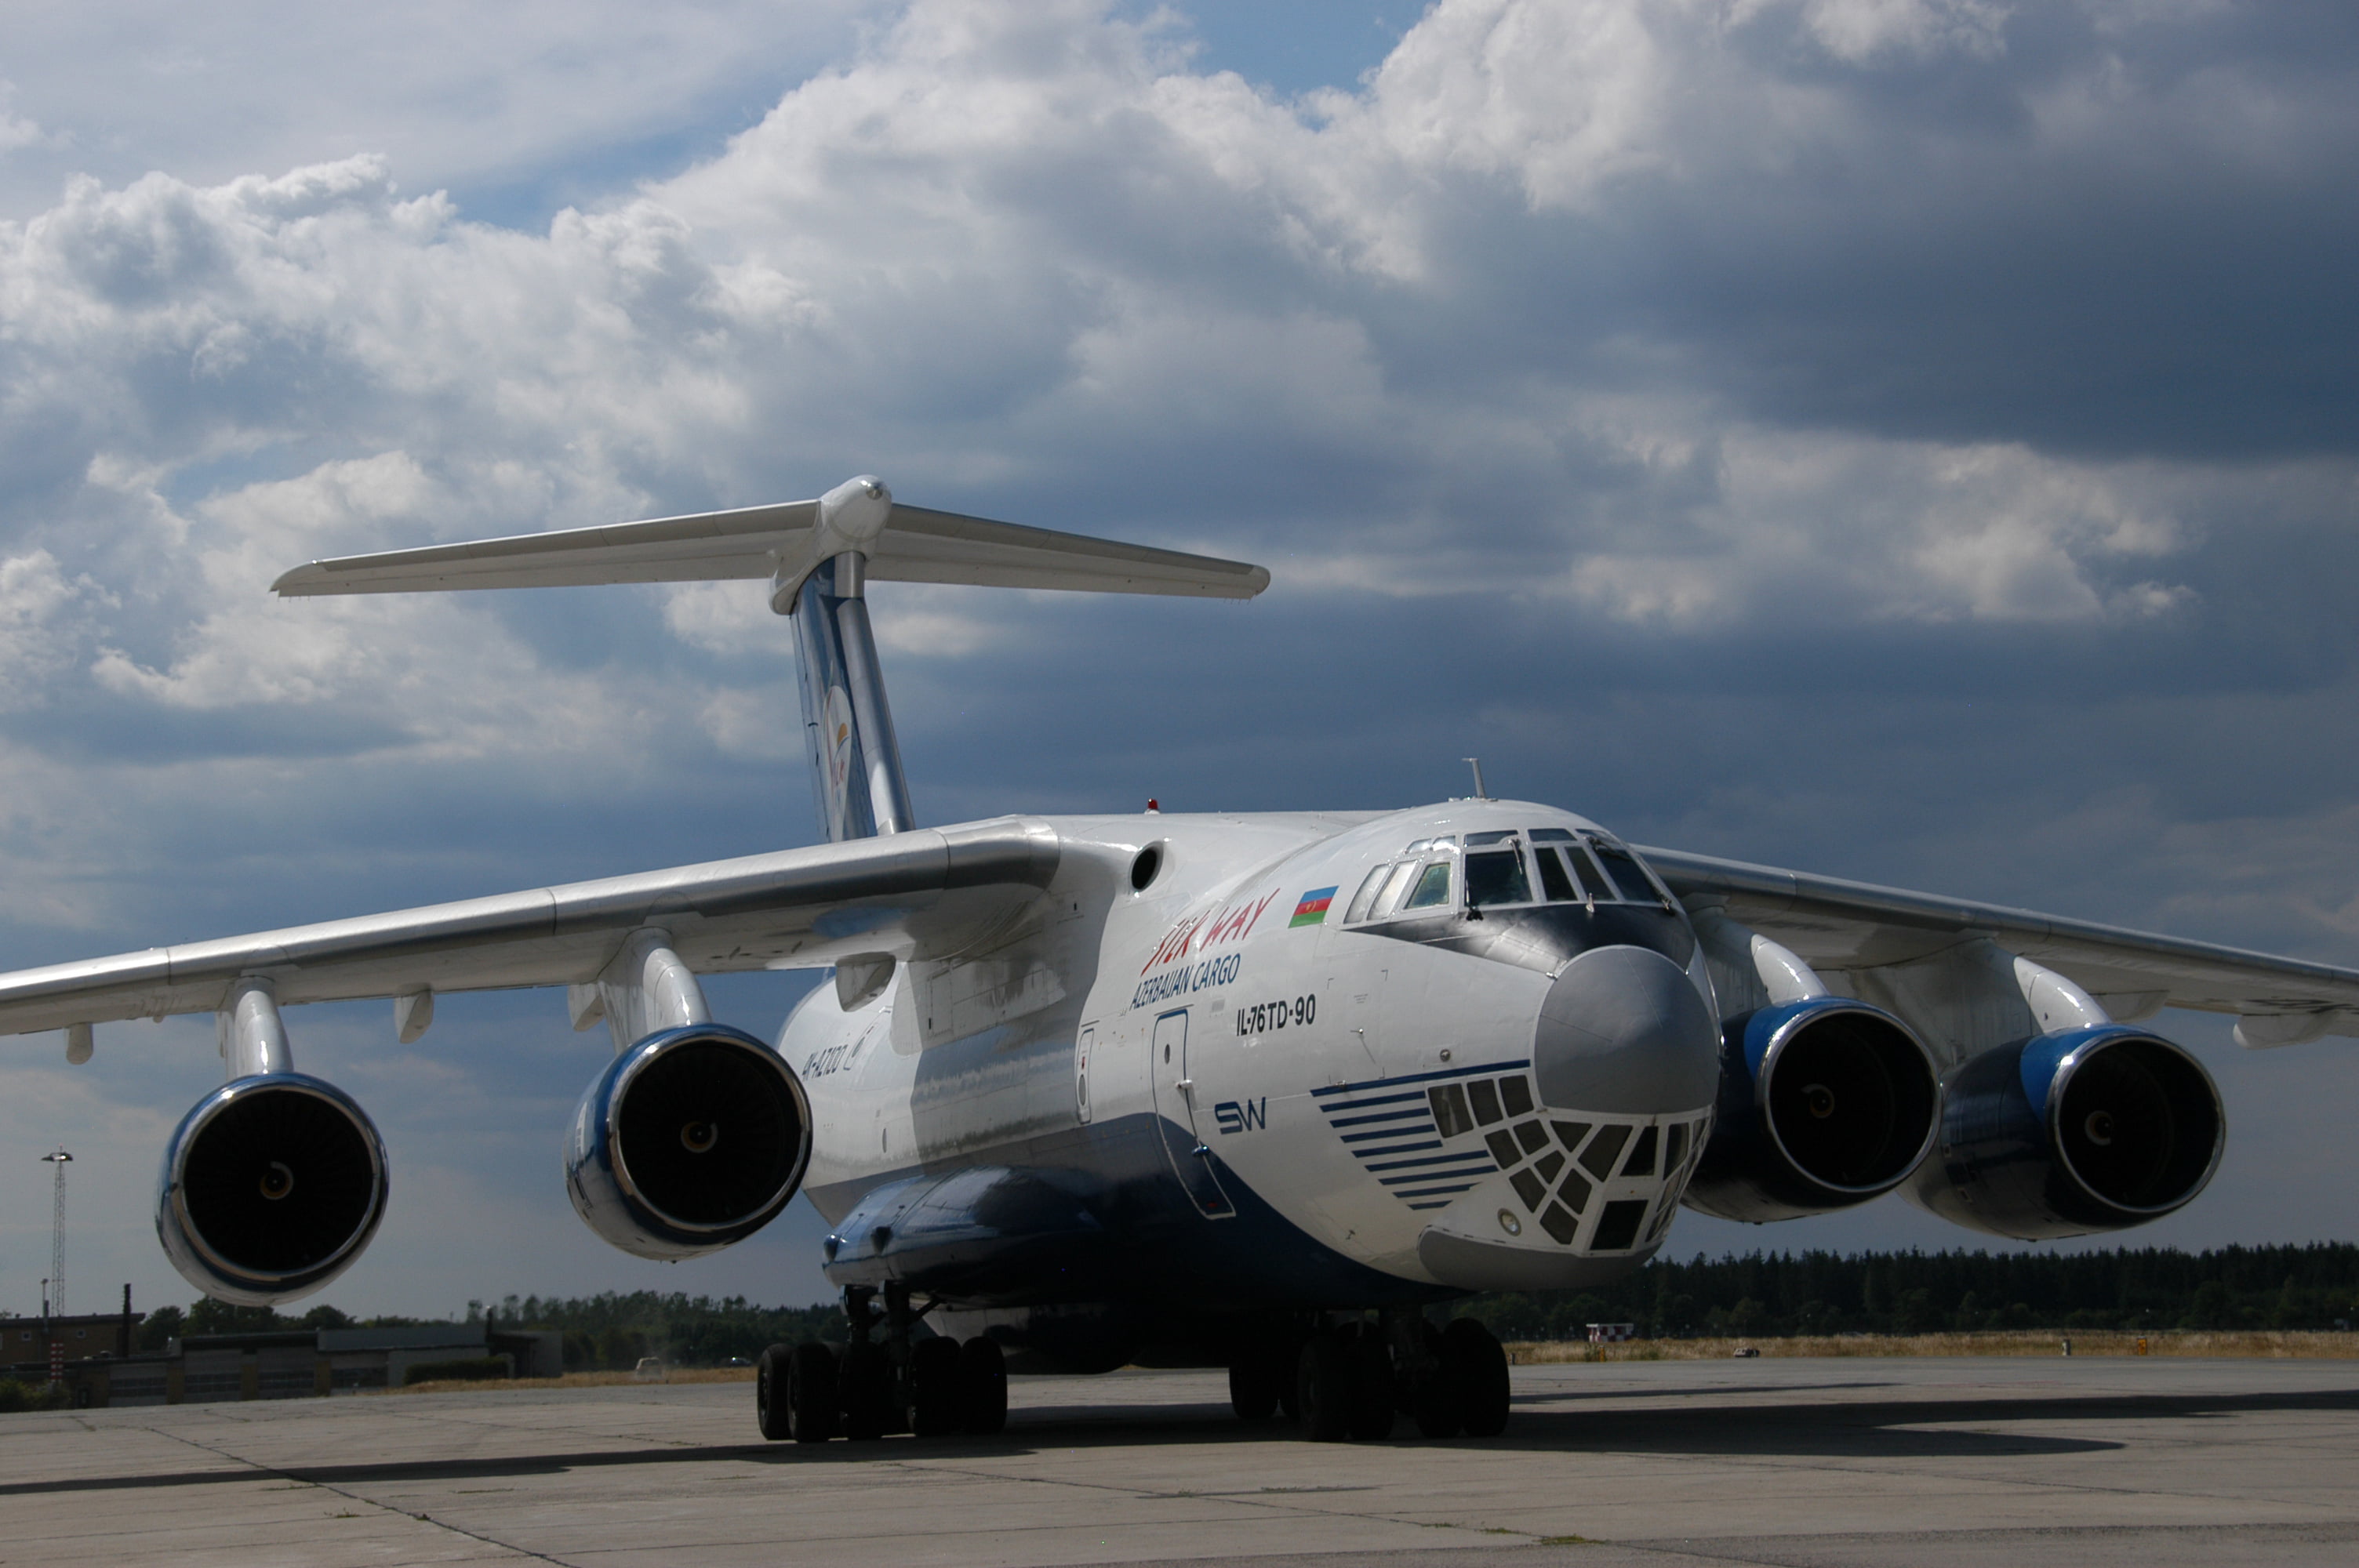 white airplane, The sky, Clouds, Photo, Aviation, The plane, The Il-76